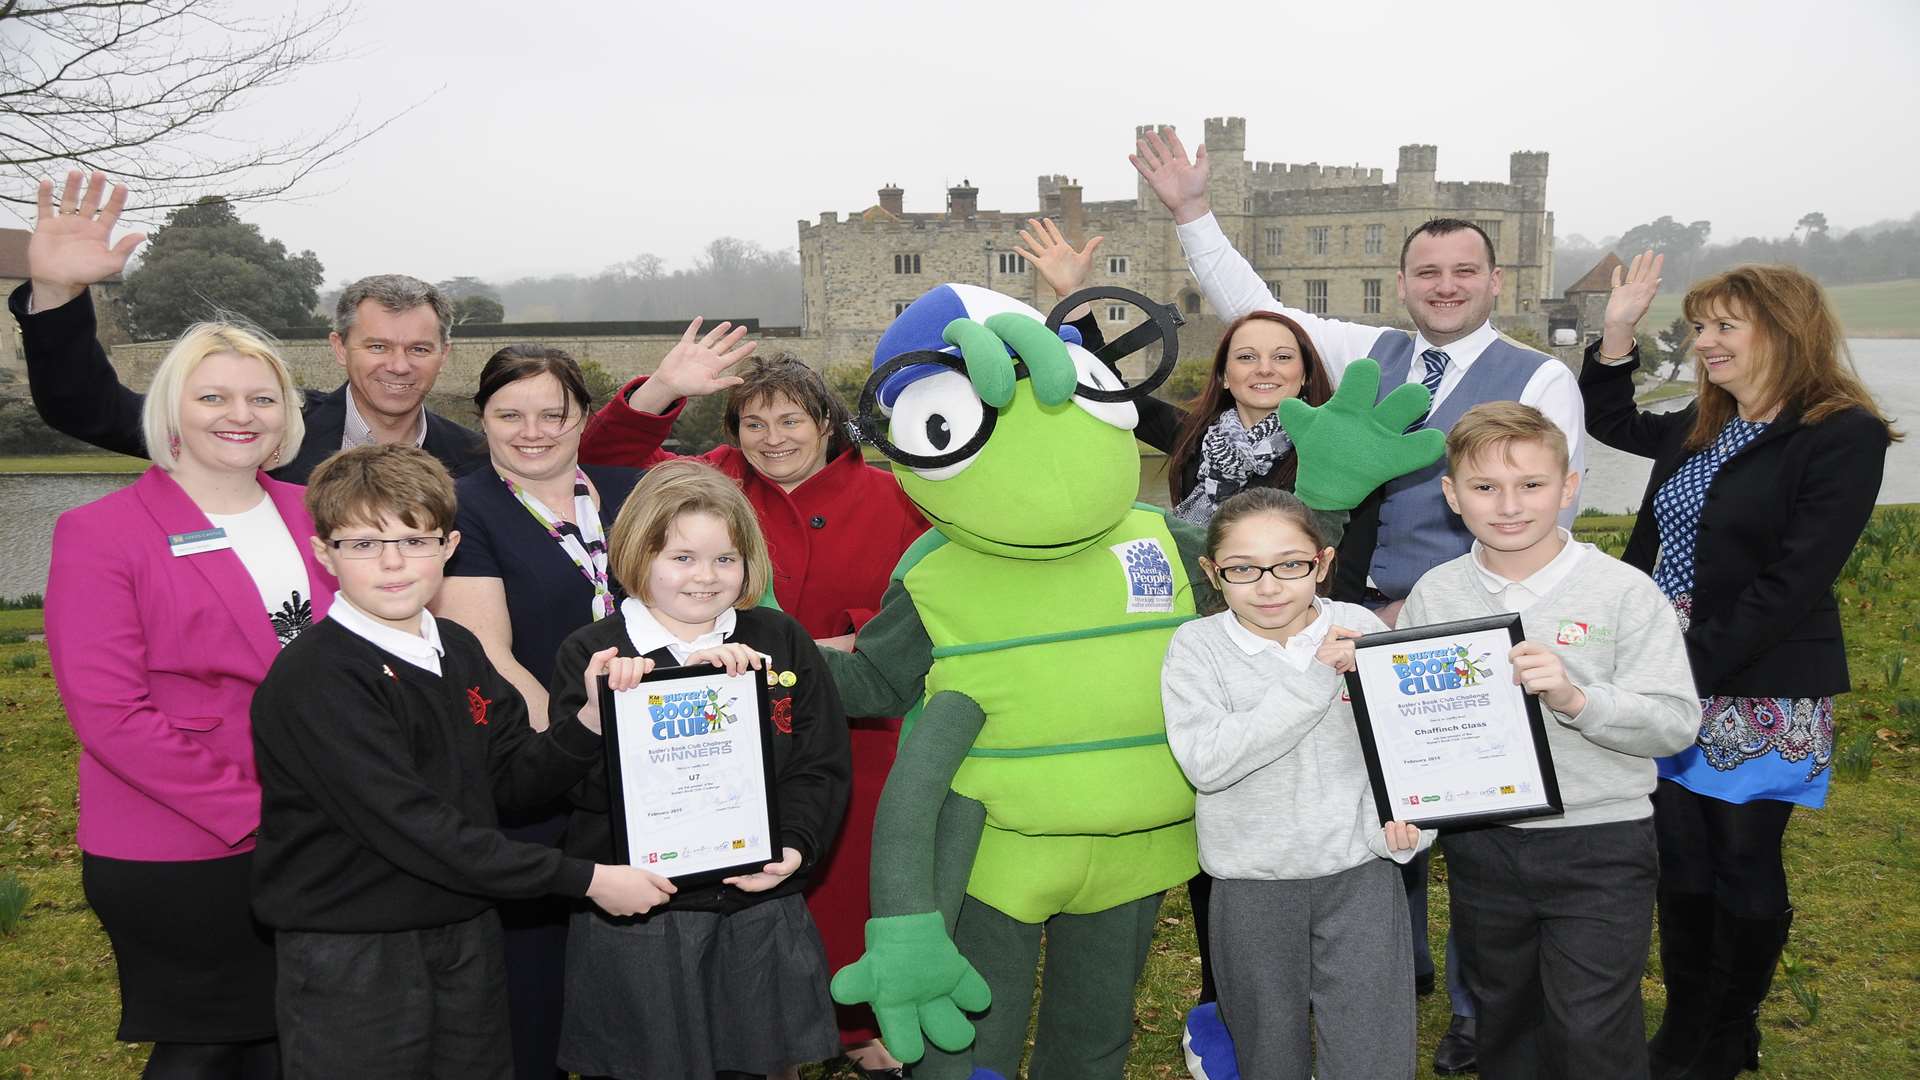 Buster's Book Club Challenge presentations at Leeds Castle: left Arthur Clarke,11, and Elise Delooze,10, Whitstable Junior School, and right Hazal Dogan,10, and Misha Garbur,11, The Oaks Primary Academy, with Buster Bug and supporters from KCC, Medway Council, Specsavers, Golding Vision (part of Golding Homes), 3R's, Countrystyle, and Mini Babybel.